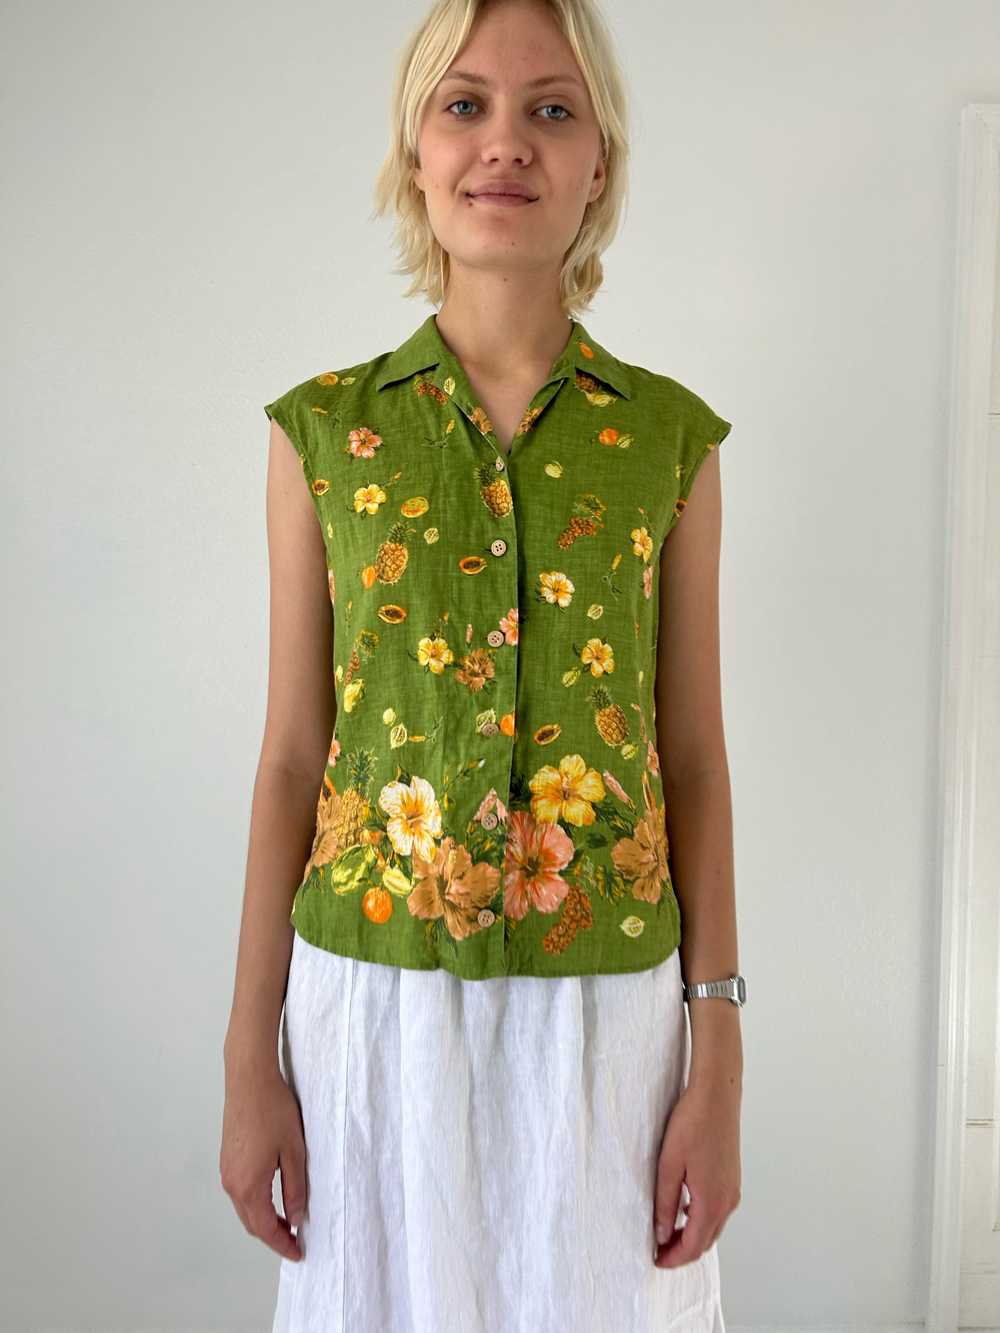 cocktail blouse - image 5